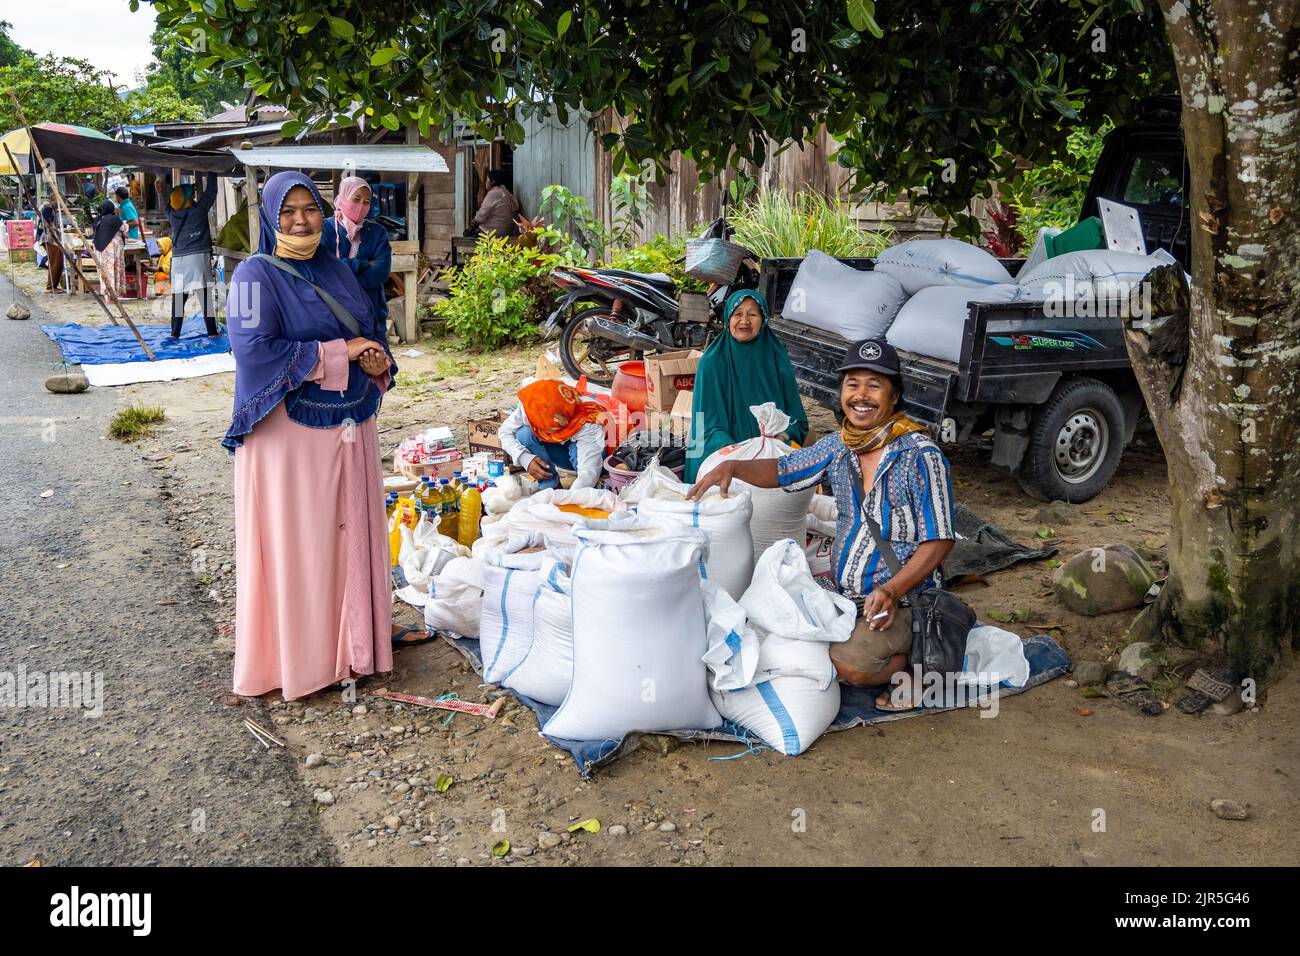 Vendors and shoppers at a village market. Sulawesi, Indonesia. Stock Photo